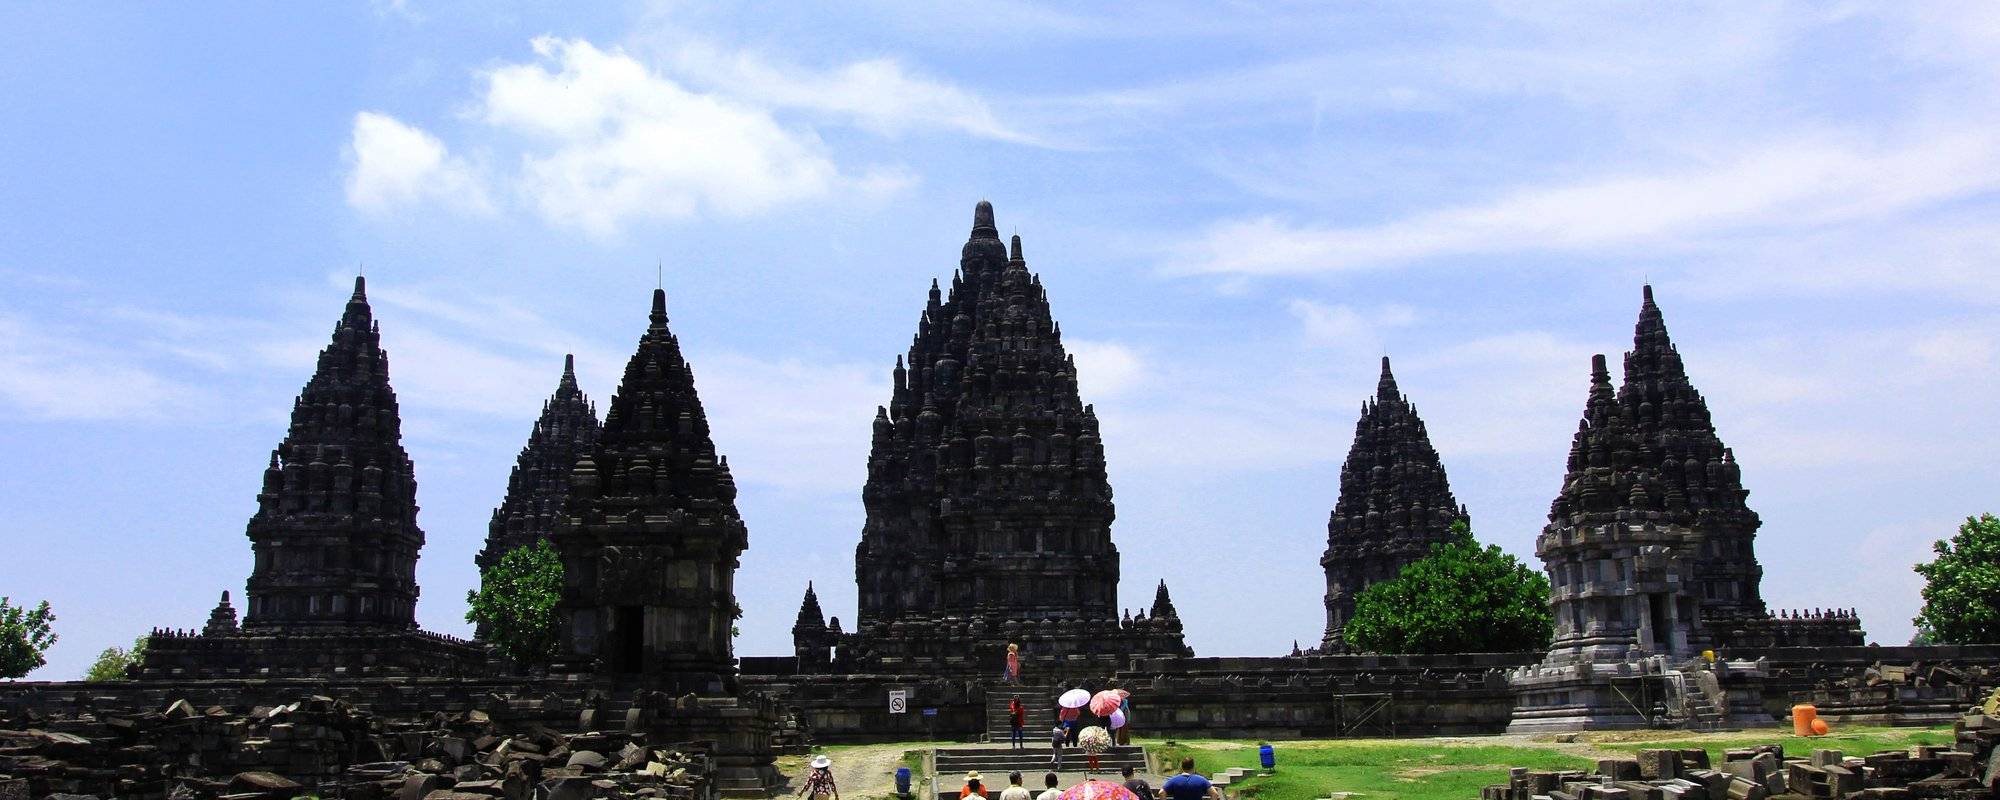 History and Architecture of the Temples of Prambanan Compound